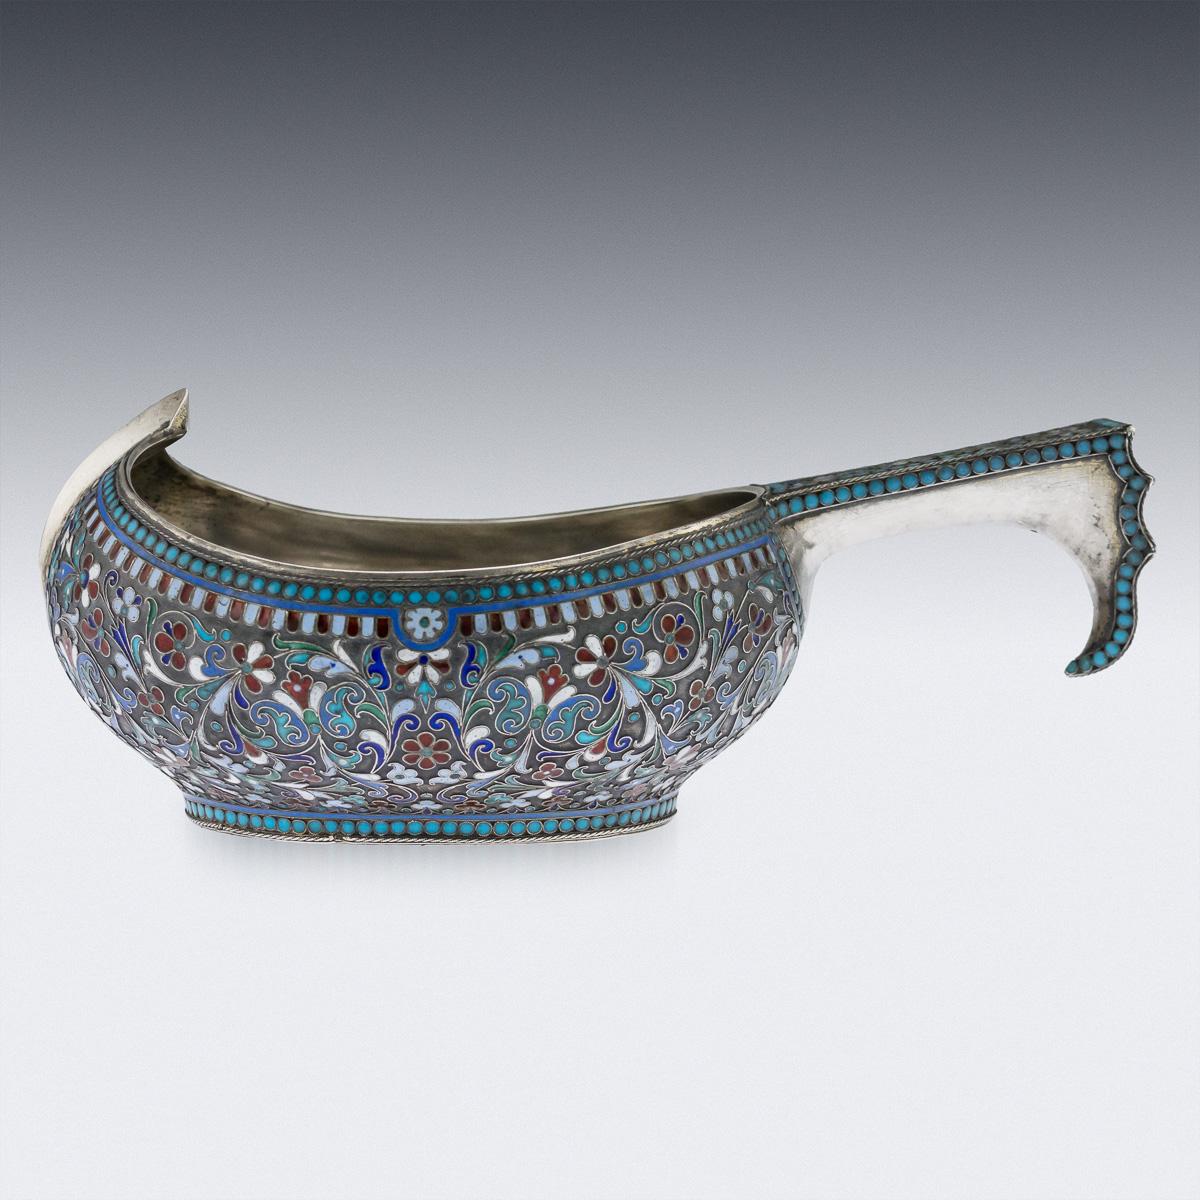 Antique Russian large solid silver and enamel Kovsh, Victor Akimov, circa 1890.

Antique late-19th century imperial Russian large solid silver and cloisonne' enamel kovsh, with raised prow and hook handle, beautifully decorated with traditional